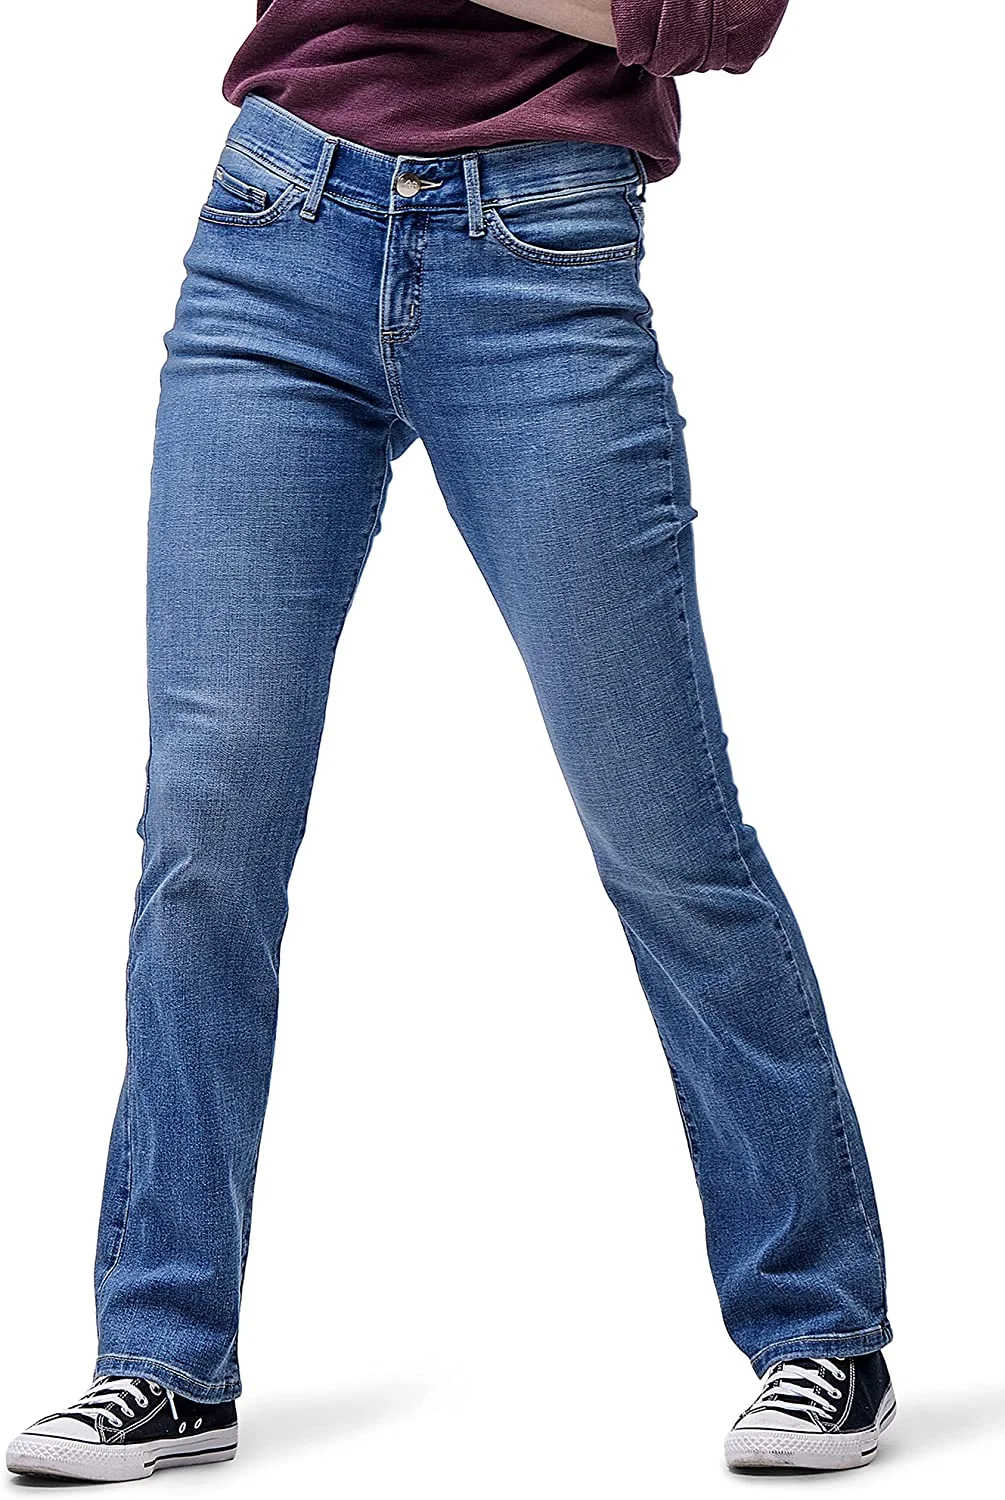 Straight Leg Jeans - Bangladesh Factory, Suppliers, Manufacturers